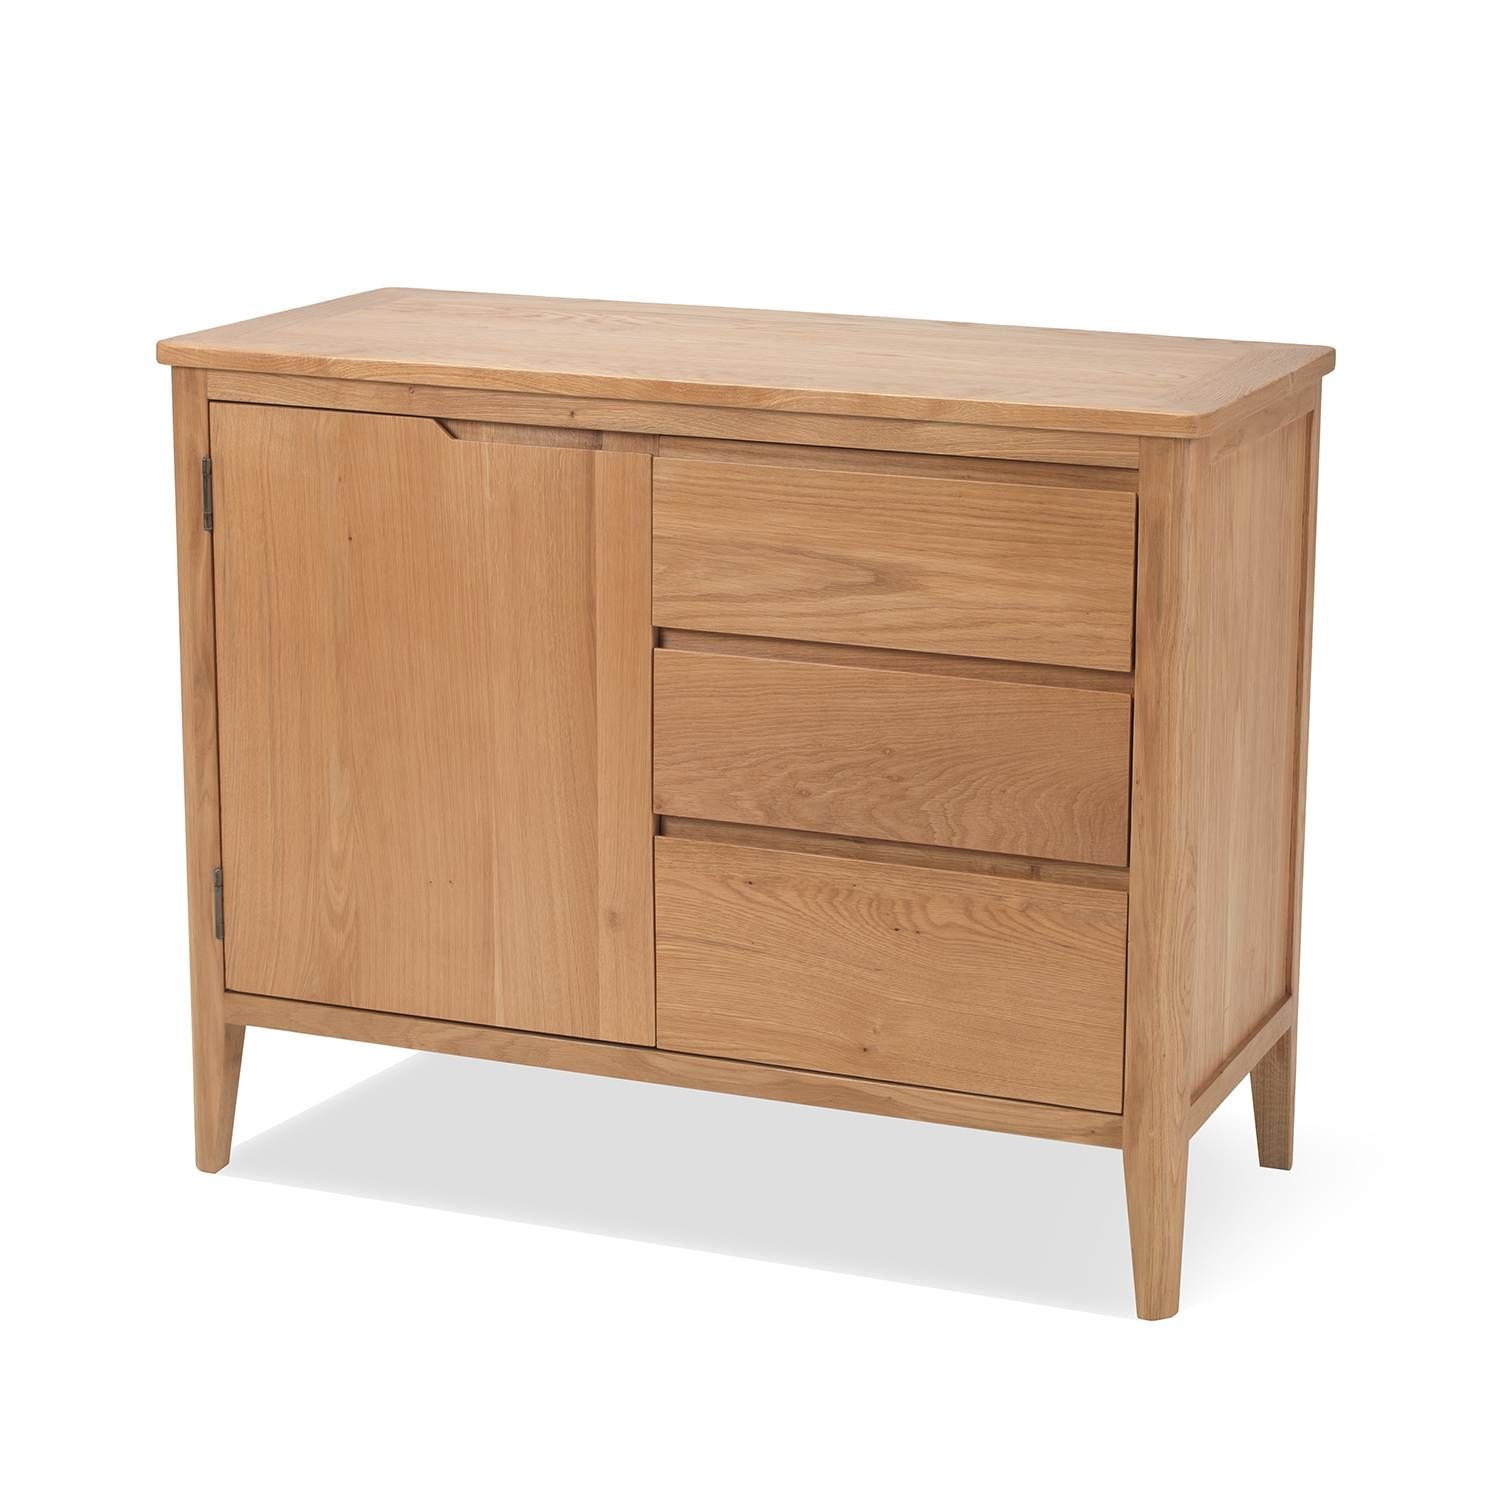 Cadley Oak Small Sideboard With Drawers – Lifestyle Furniture Uk Regarding Small Wooden Sideboard (View 13 of 20)